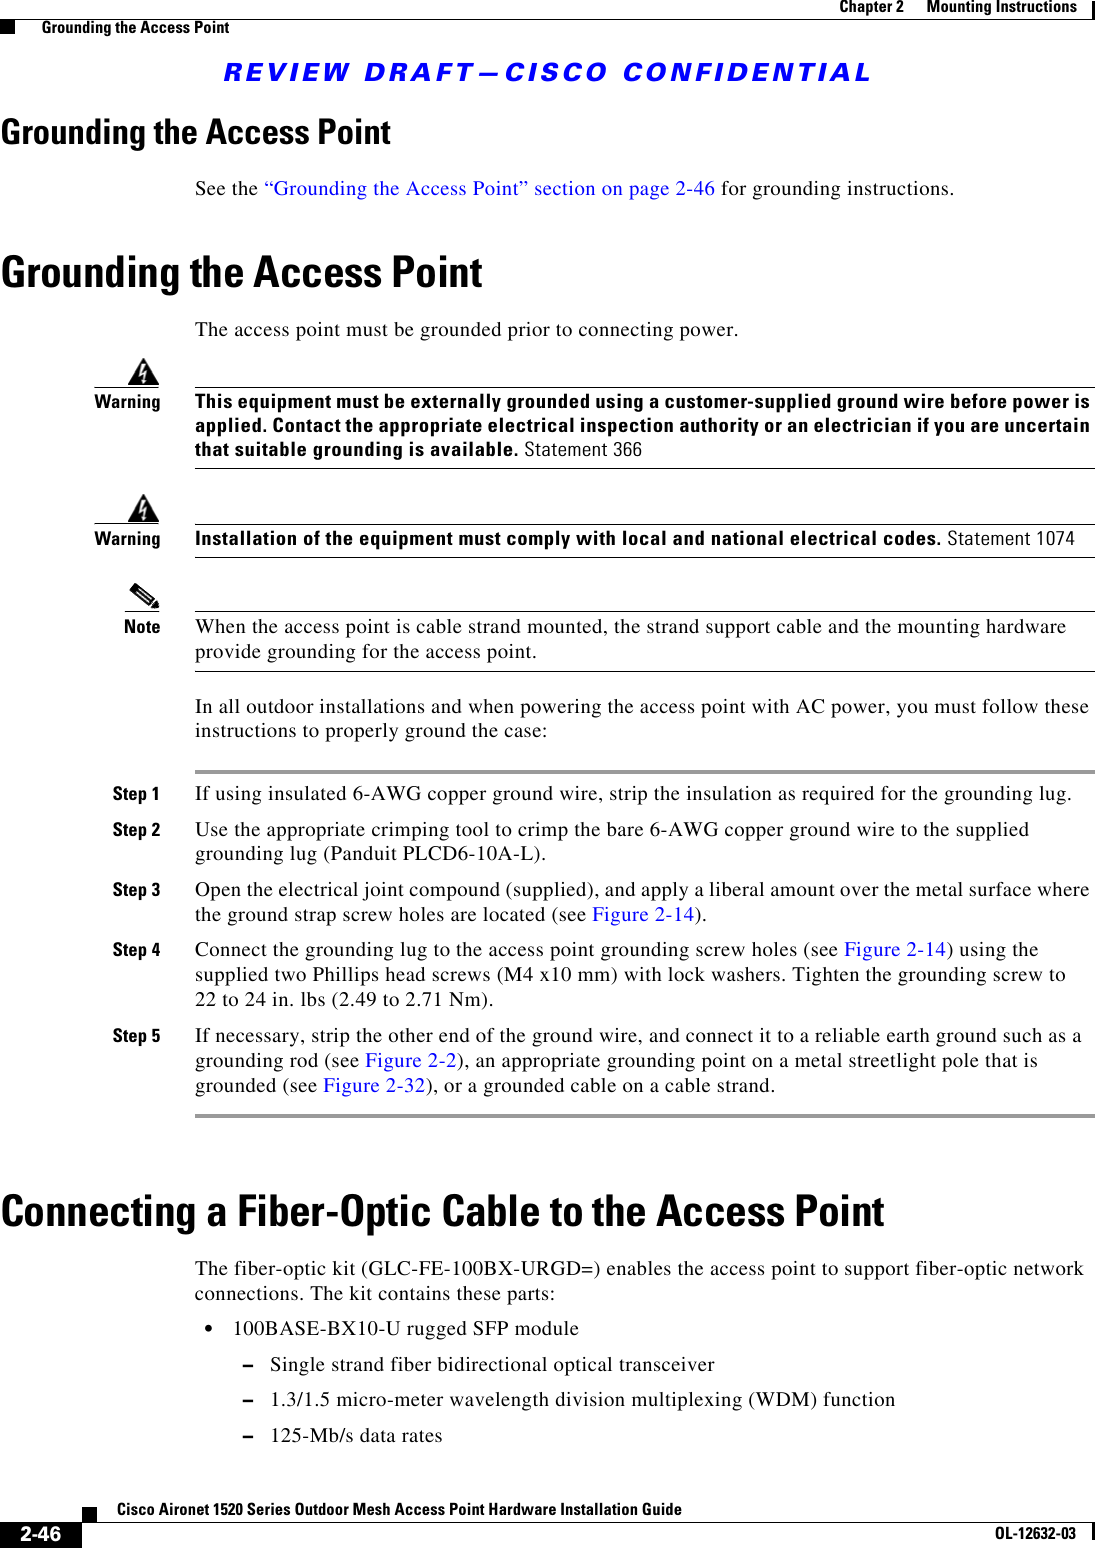 REVIEW DRAFT—CISCO CONFIDENTIAL2-46Cisco Aironet 1520 Series Outdoor Mesh Access Point Hardware Installation GuideOL-12632-03Chapter 2      Mounting Instructions  Grounding the Access PointGrounding the Access PointSee the “Grounding the Access Point” section on page 2-46 for grounding instructions.Grounding the Access PointThe access point must be grounded prior to connecting power.WarningThis equipment must be externally grounded using a customer-supplied ground wire before power is applied. Contact the appropriate electrical inspection authority or an electrician if you are uncertain that suitable grounding is available. Statement 366WarningInstallation of the equipment must comply with local and national electrical codes. Statement 1074Note When the access point is cable strand mounted, the strand support cable and the mounting hardware provide grounding for the access point.In all outdoor installations and when powering the access point with AC power, you must follow these instructions to properly ground the case:Step 1 If using insulated 6-AWG copper ground wire, strip the insulation as required for the grounding lug.Step 2 Use the appropriate crimping tool to crimp the bare 6-AWG copper ground wire to the supplied grounding lug (Panduit PLCD6-10A-L).Step 3 Open the electrical joint compound (supplied), and apply a liberal amount over the metal surface where the ground strap screw holes are located (see Figure 2-14). Step 4 Connect the grounding lug to the access point grounding screw holes (see Figure 2-14) using the supplied two Phillips head screws (M4 x10 mm) with lock washers. Tighten the grounding screw to 22 to 24 in. lbs (2.49 to 2.71 Nm). Step 5 If necessary, strip the other end of the ground wire, and connect it to a reliable earth ground such as a grounding rod (see Figure 2-2), an appropriate grounding point on a metal streetlight pole that is grounded (see Figure 2-32), or a grounded cable on a cable strand.Connecting a Fiber-Optic Cable to the Access Point The fiber-optic kit (GLC-FE-100BX-URGD=) enables the access point to support fiber-optic network connections. The kit contains these parts:  • 100BASE-BX10-U rugged SFP module  –Single strand fiber bidirectional optical transceiver  –1.3/1.5 micro-meter wavelength division multiplexing (WDM) function  –125-Mb/s data rates